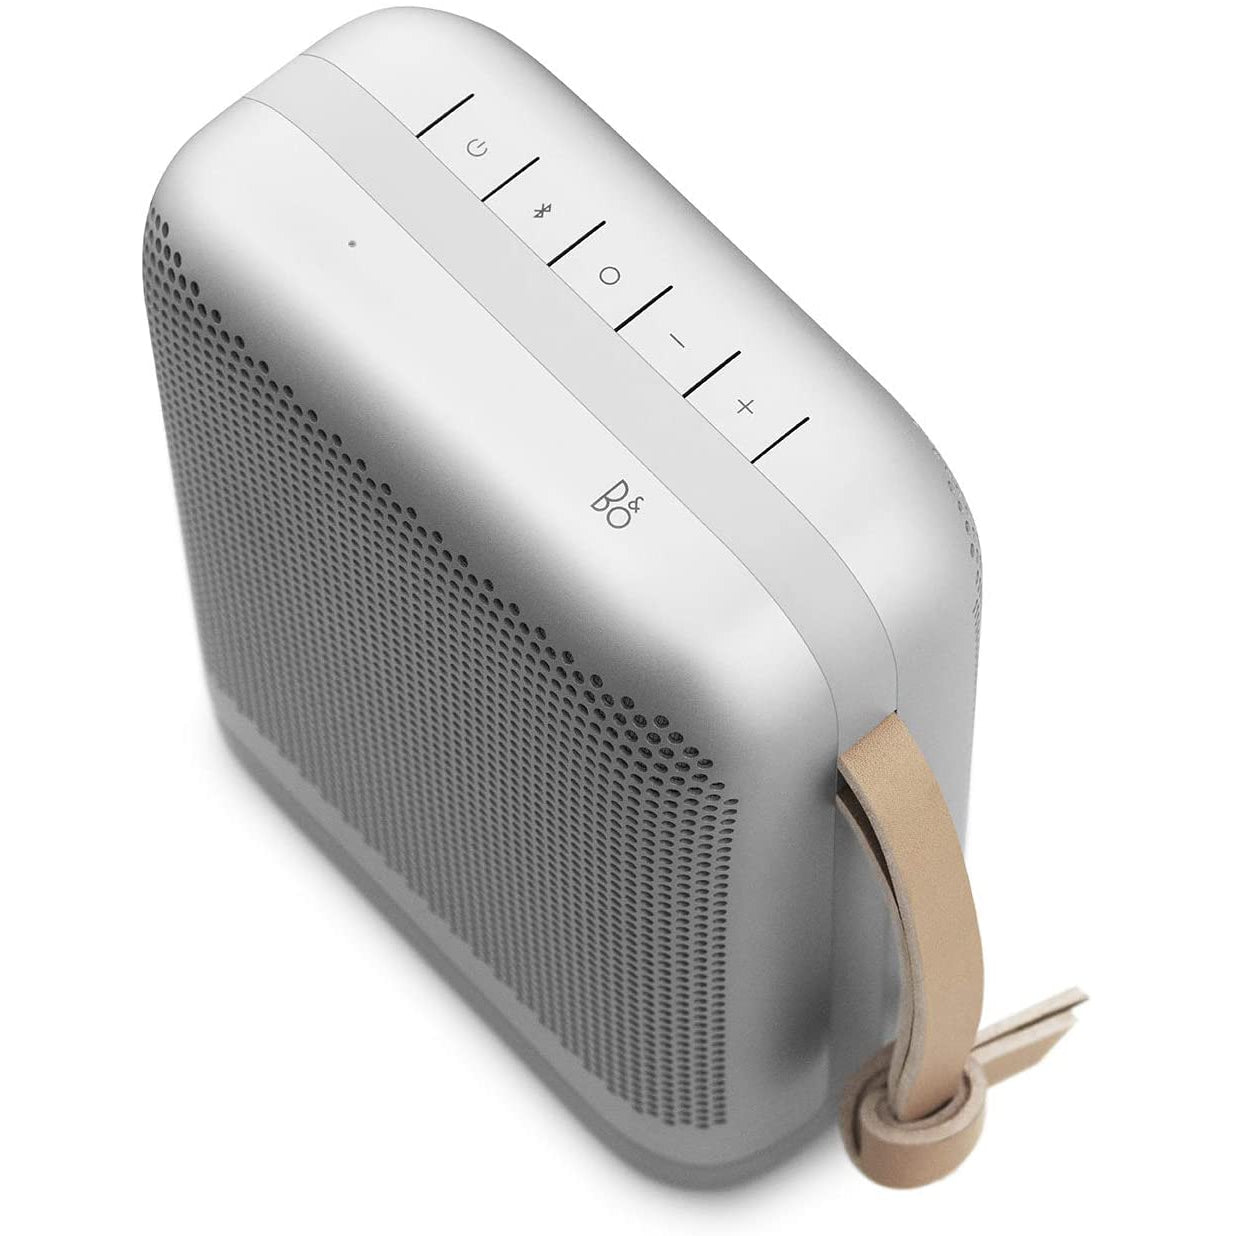 Bang & Olufsen Beoplay P6 Portable Bluetooth Speaker, Natural